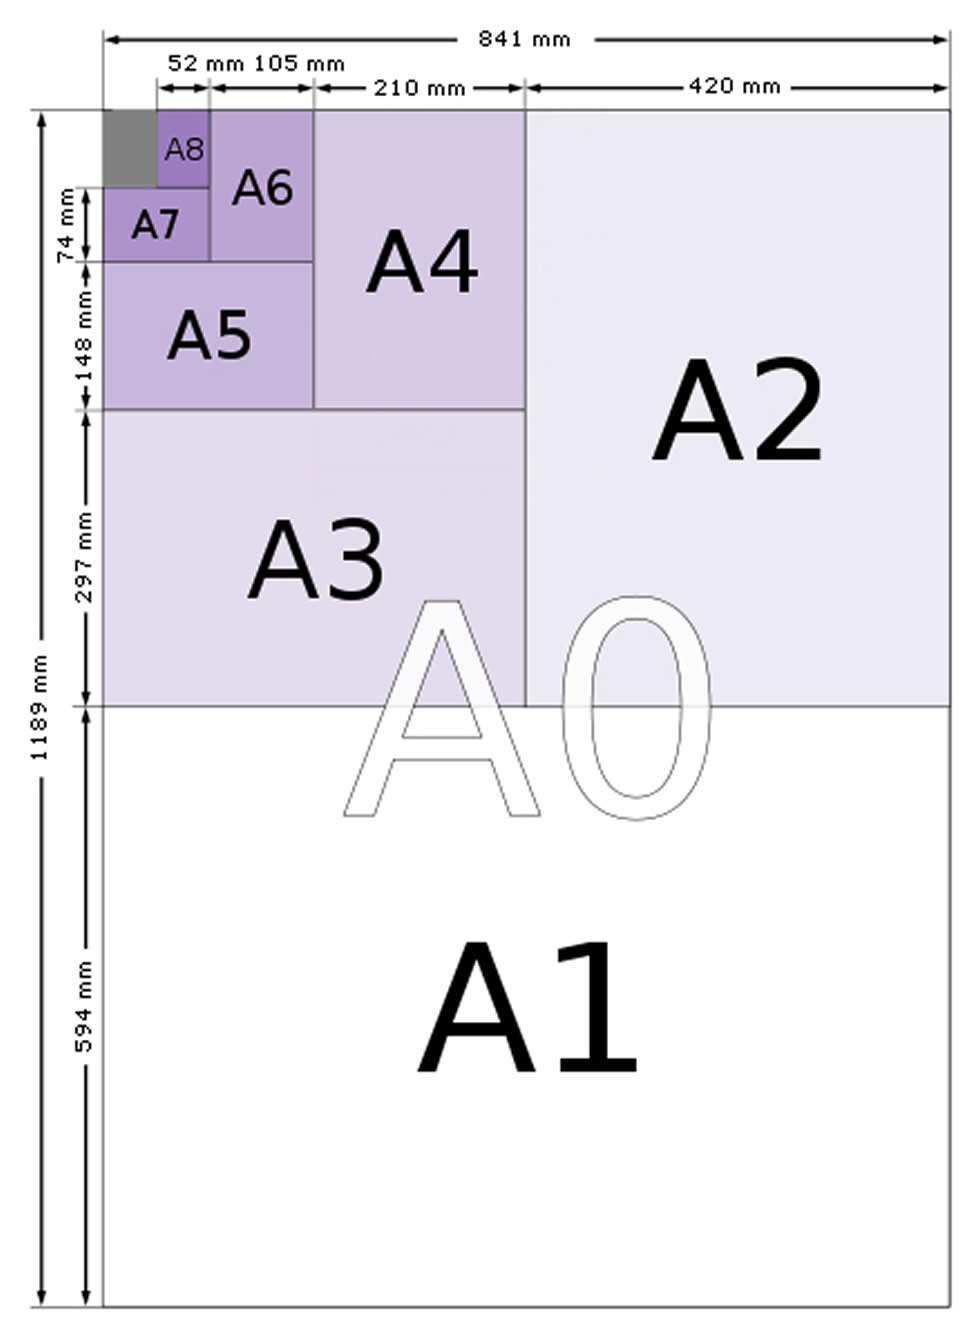 Full Sized Diagram Of A Series Paper Sizes 2584